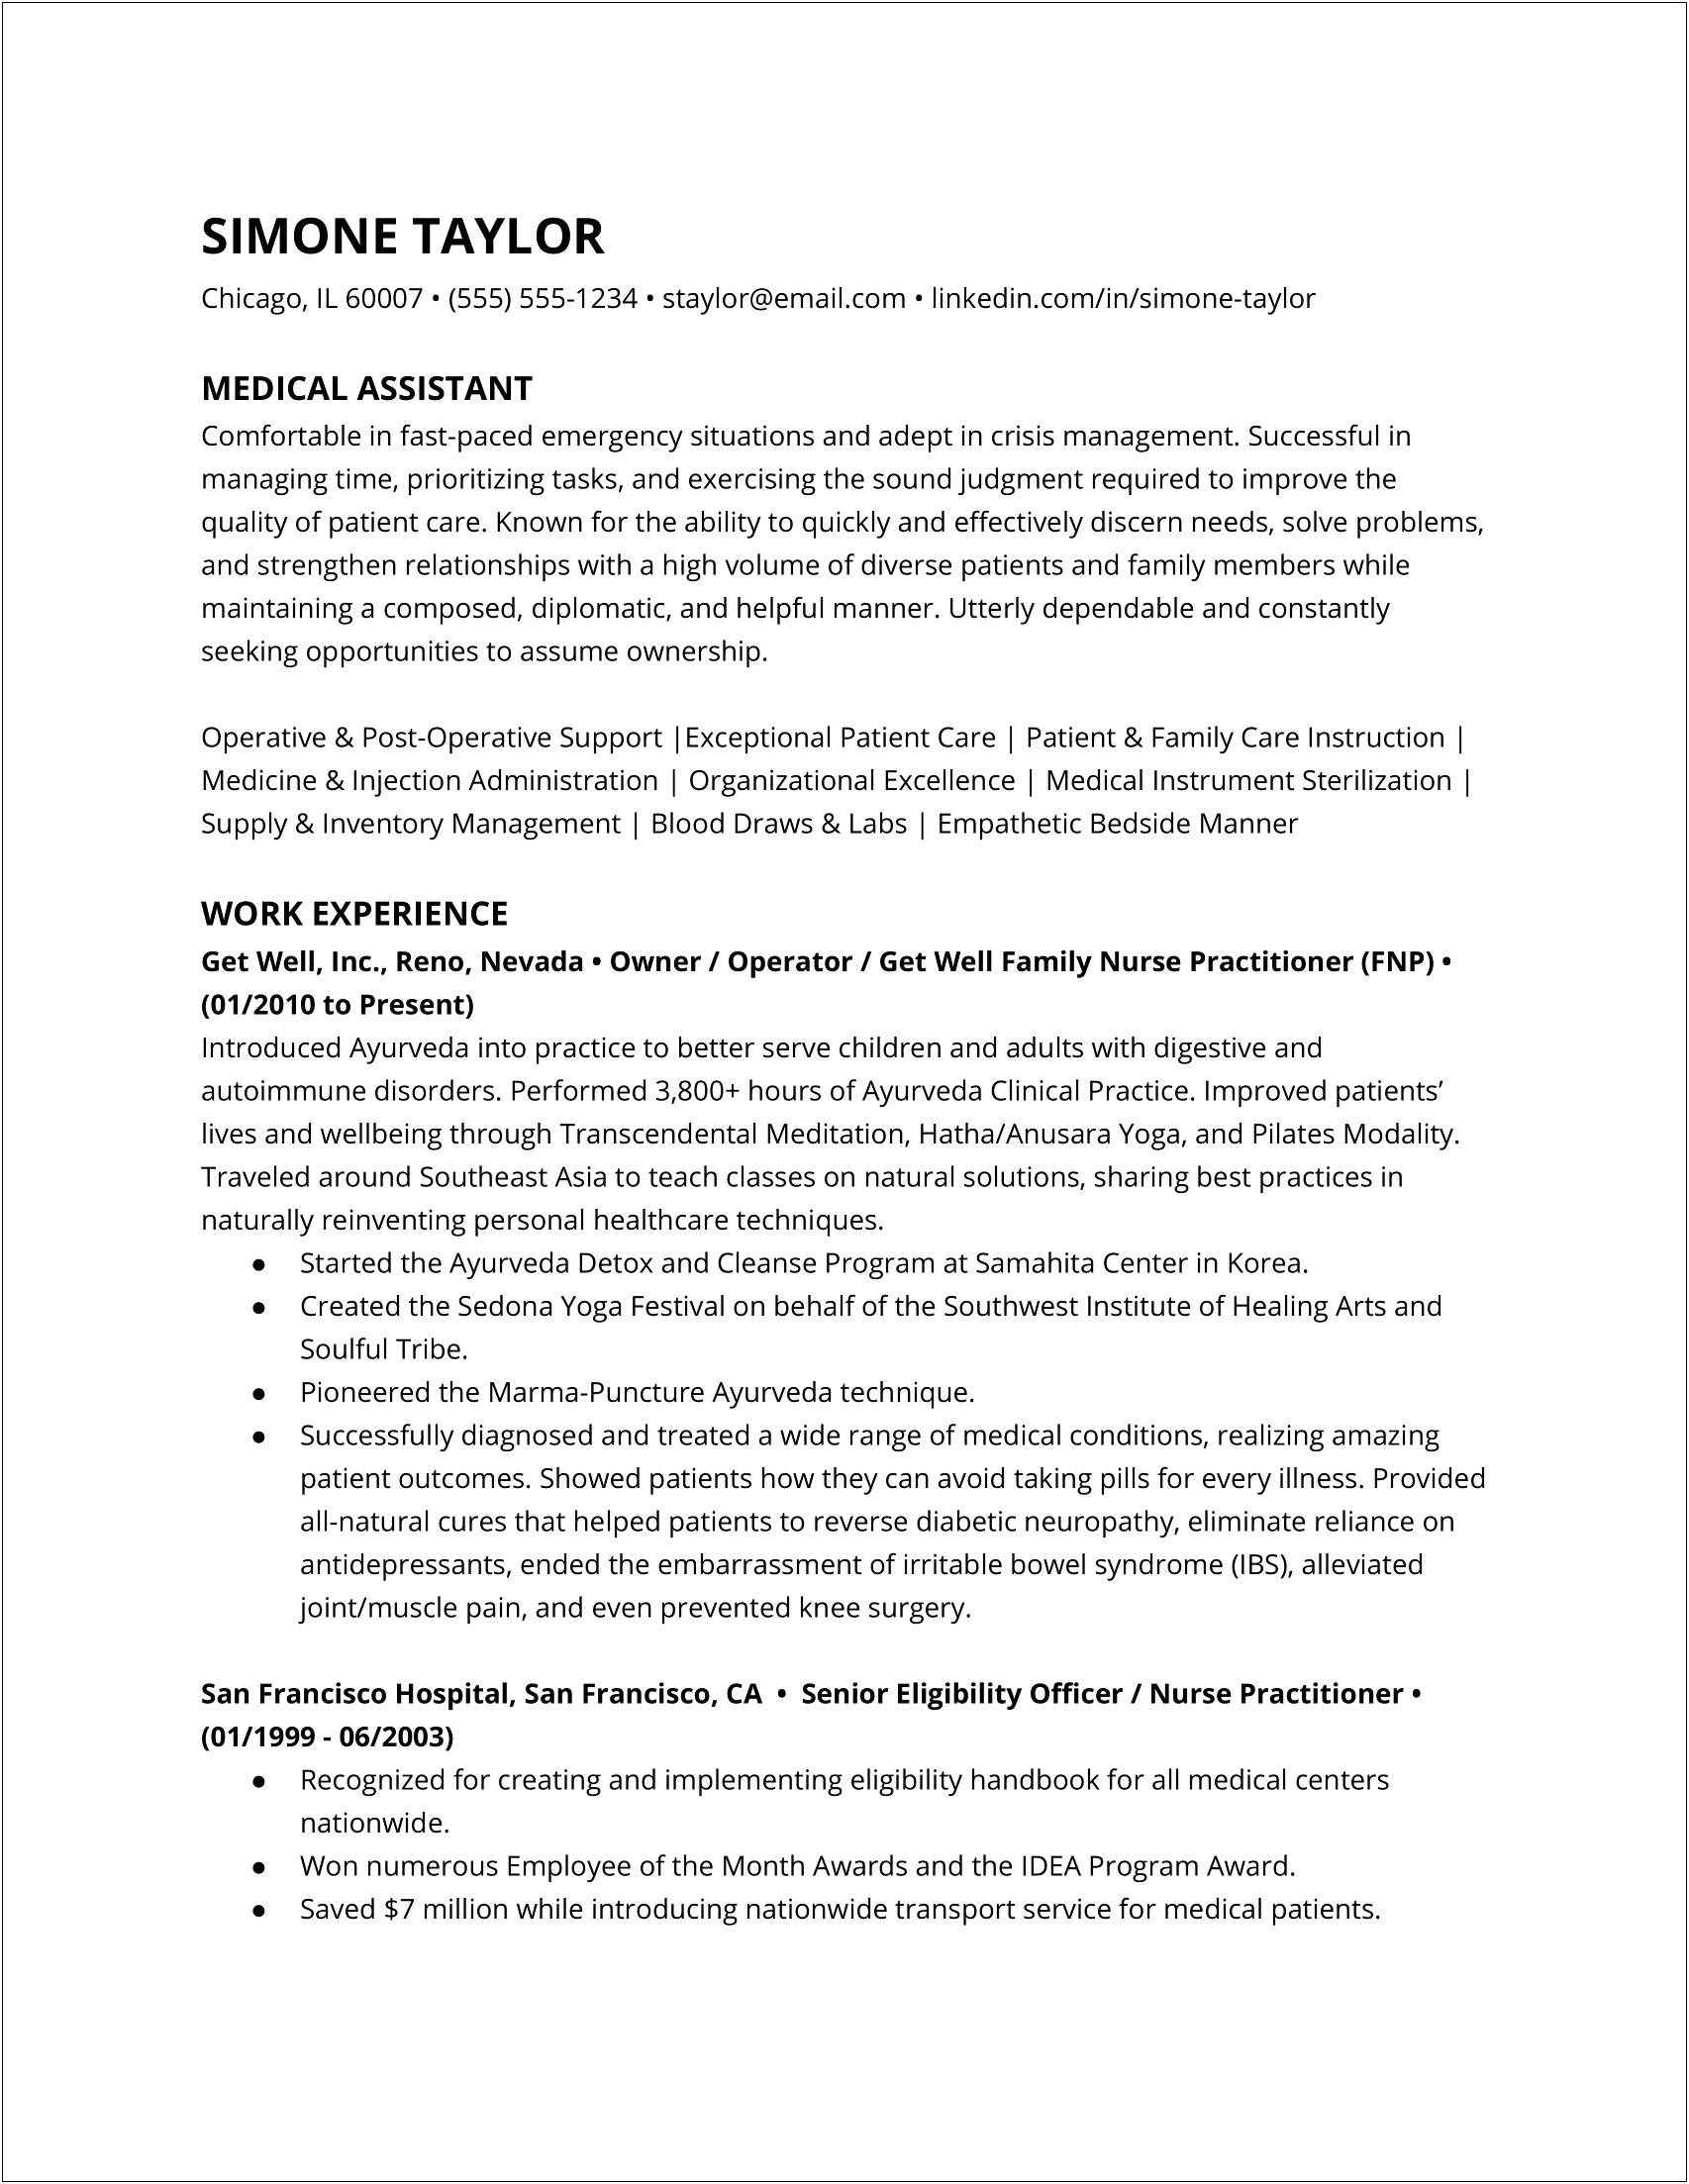 Summary For A Medical Assistant Resume